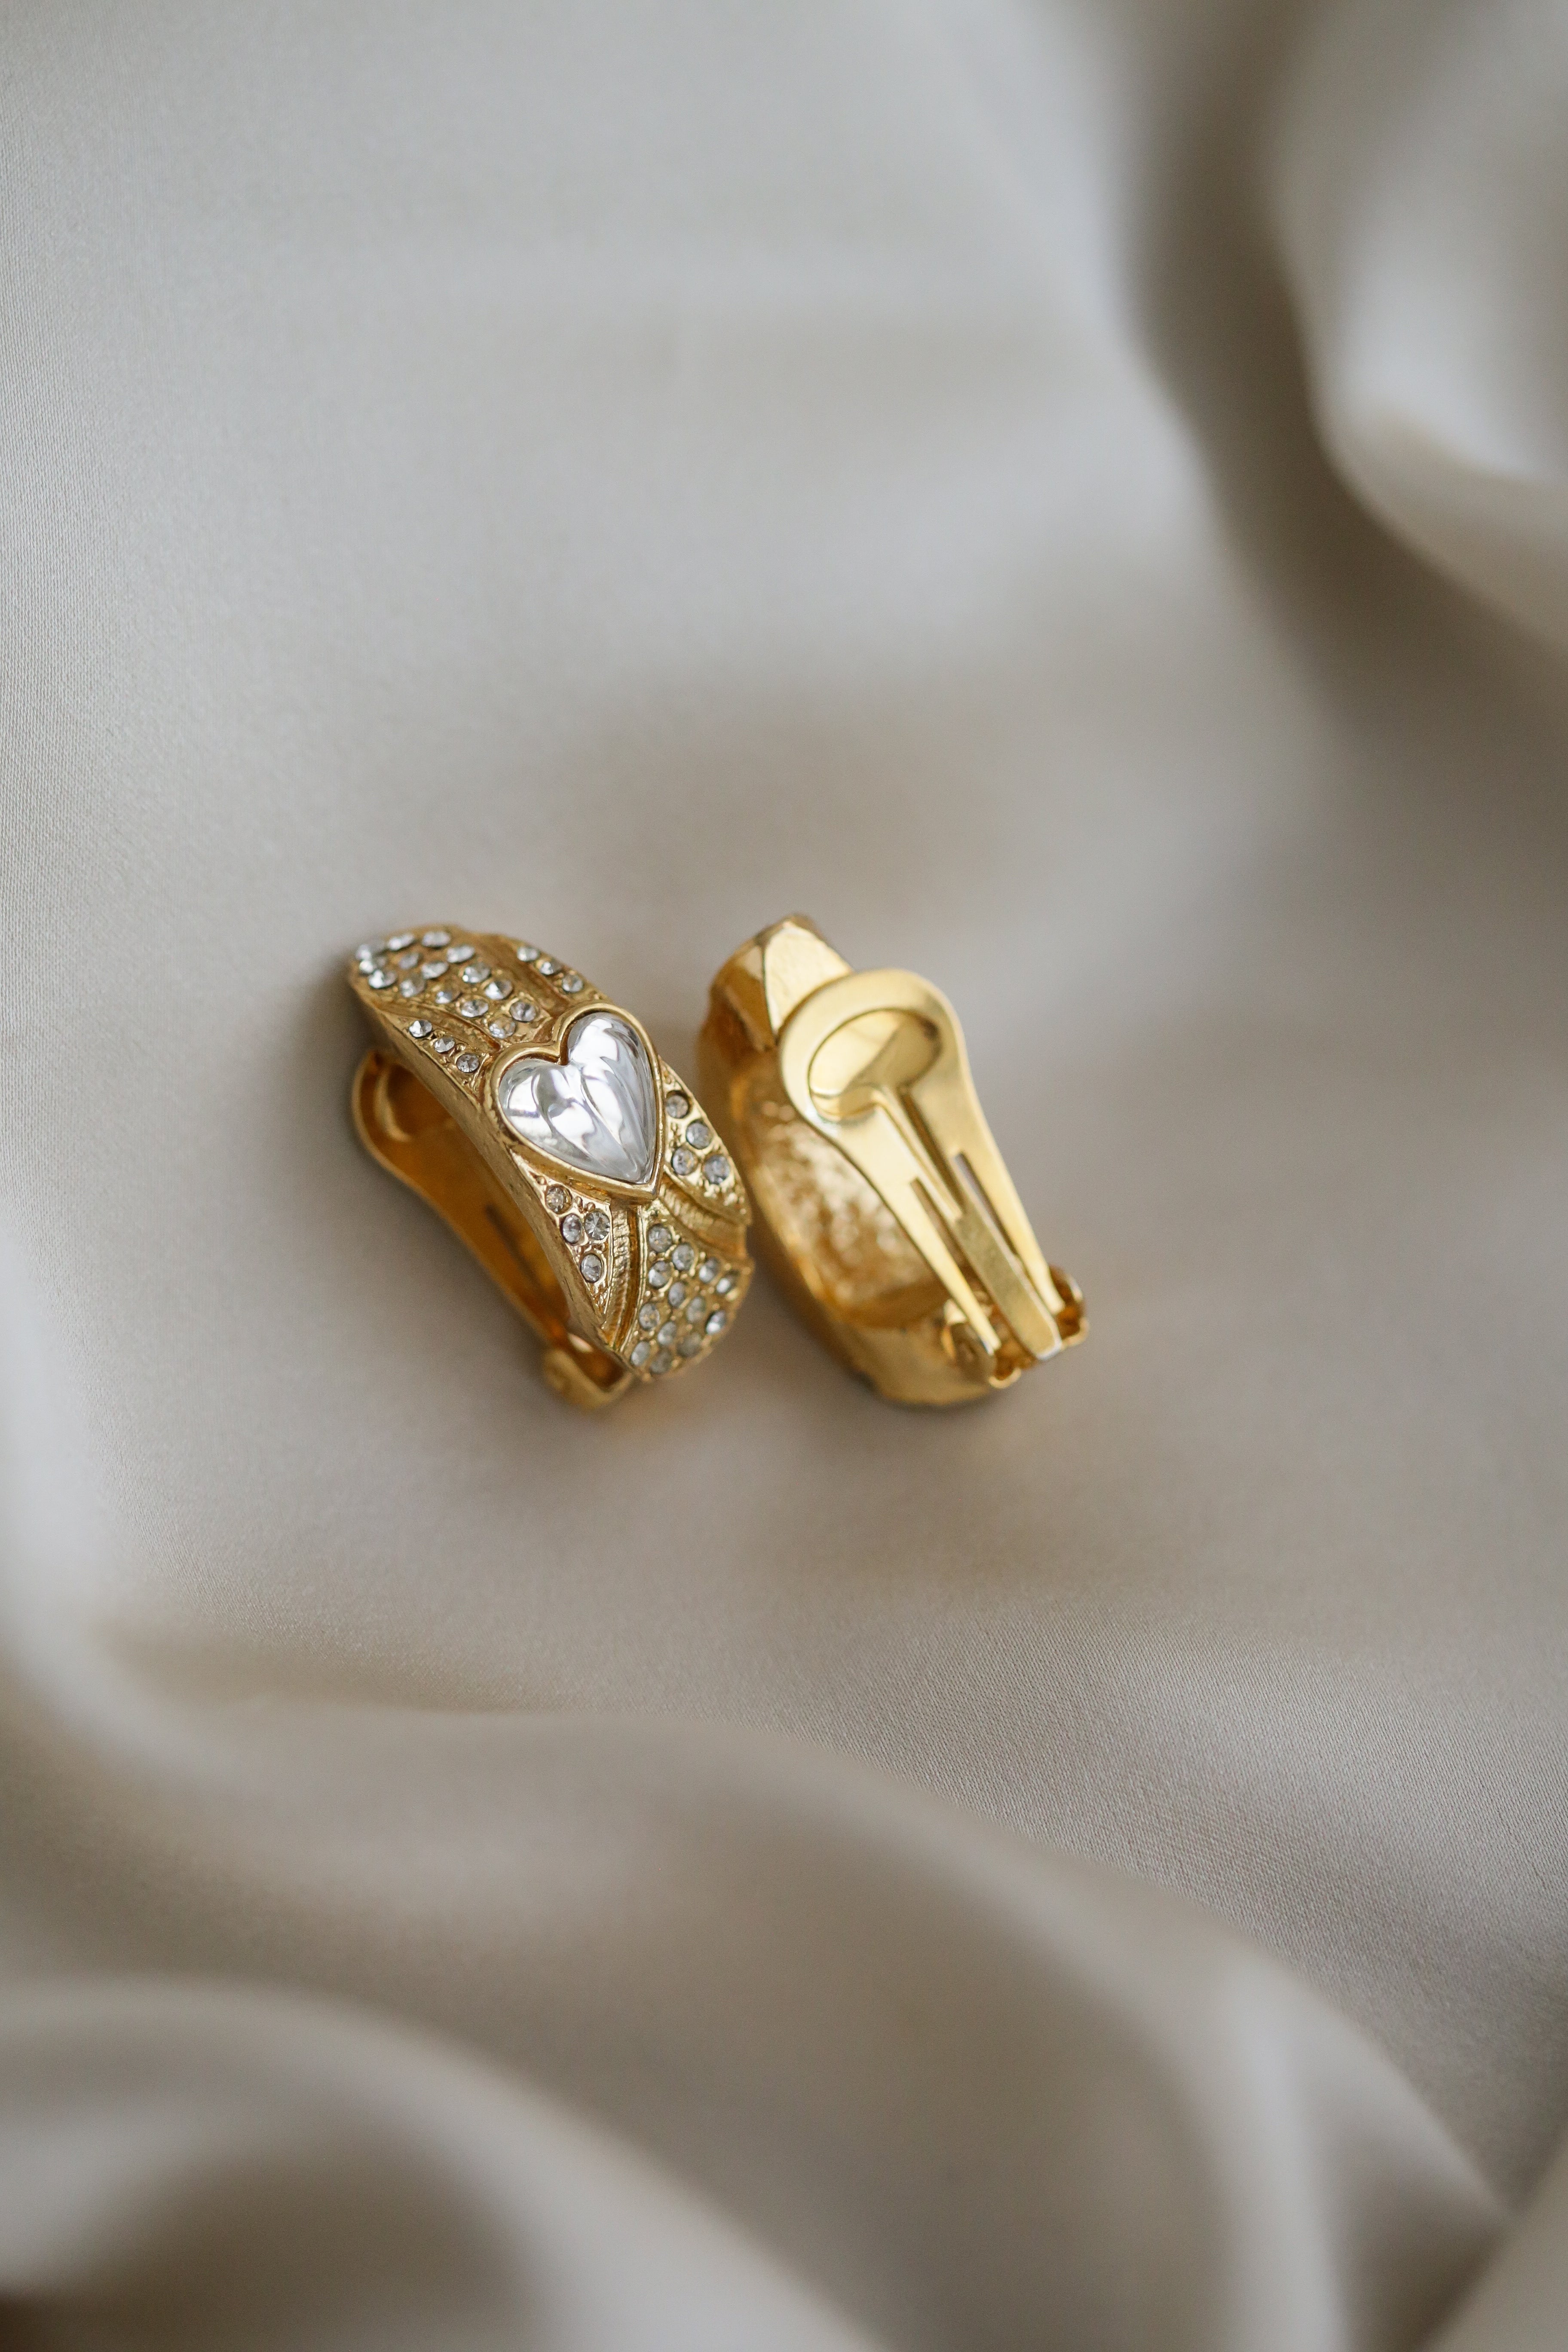 The Heart - Vintage Clip Earrings - Boutique Minimaliste has waterproof, durable, elegant and vintage inspired jewelry